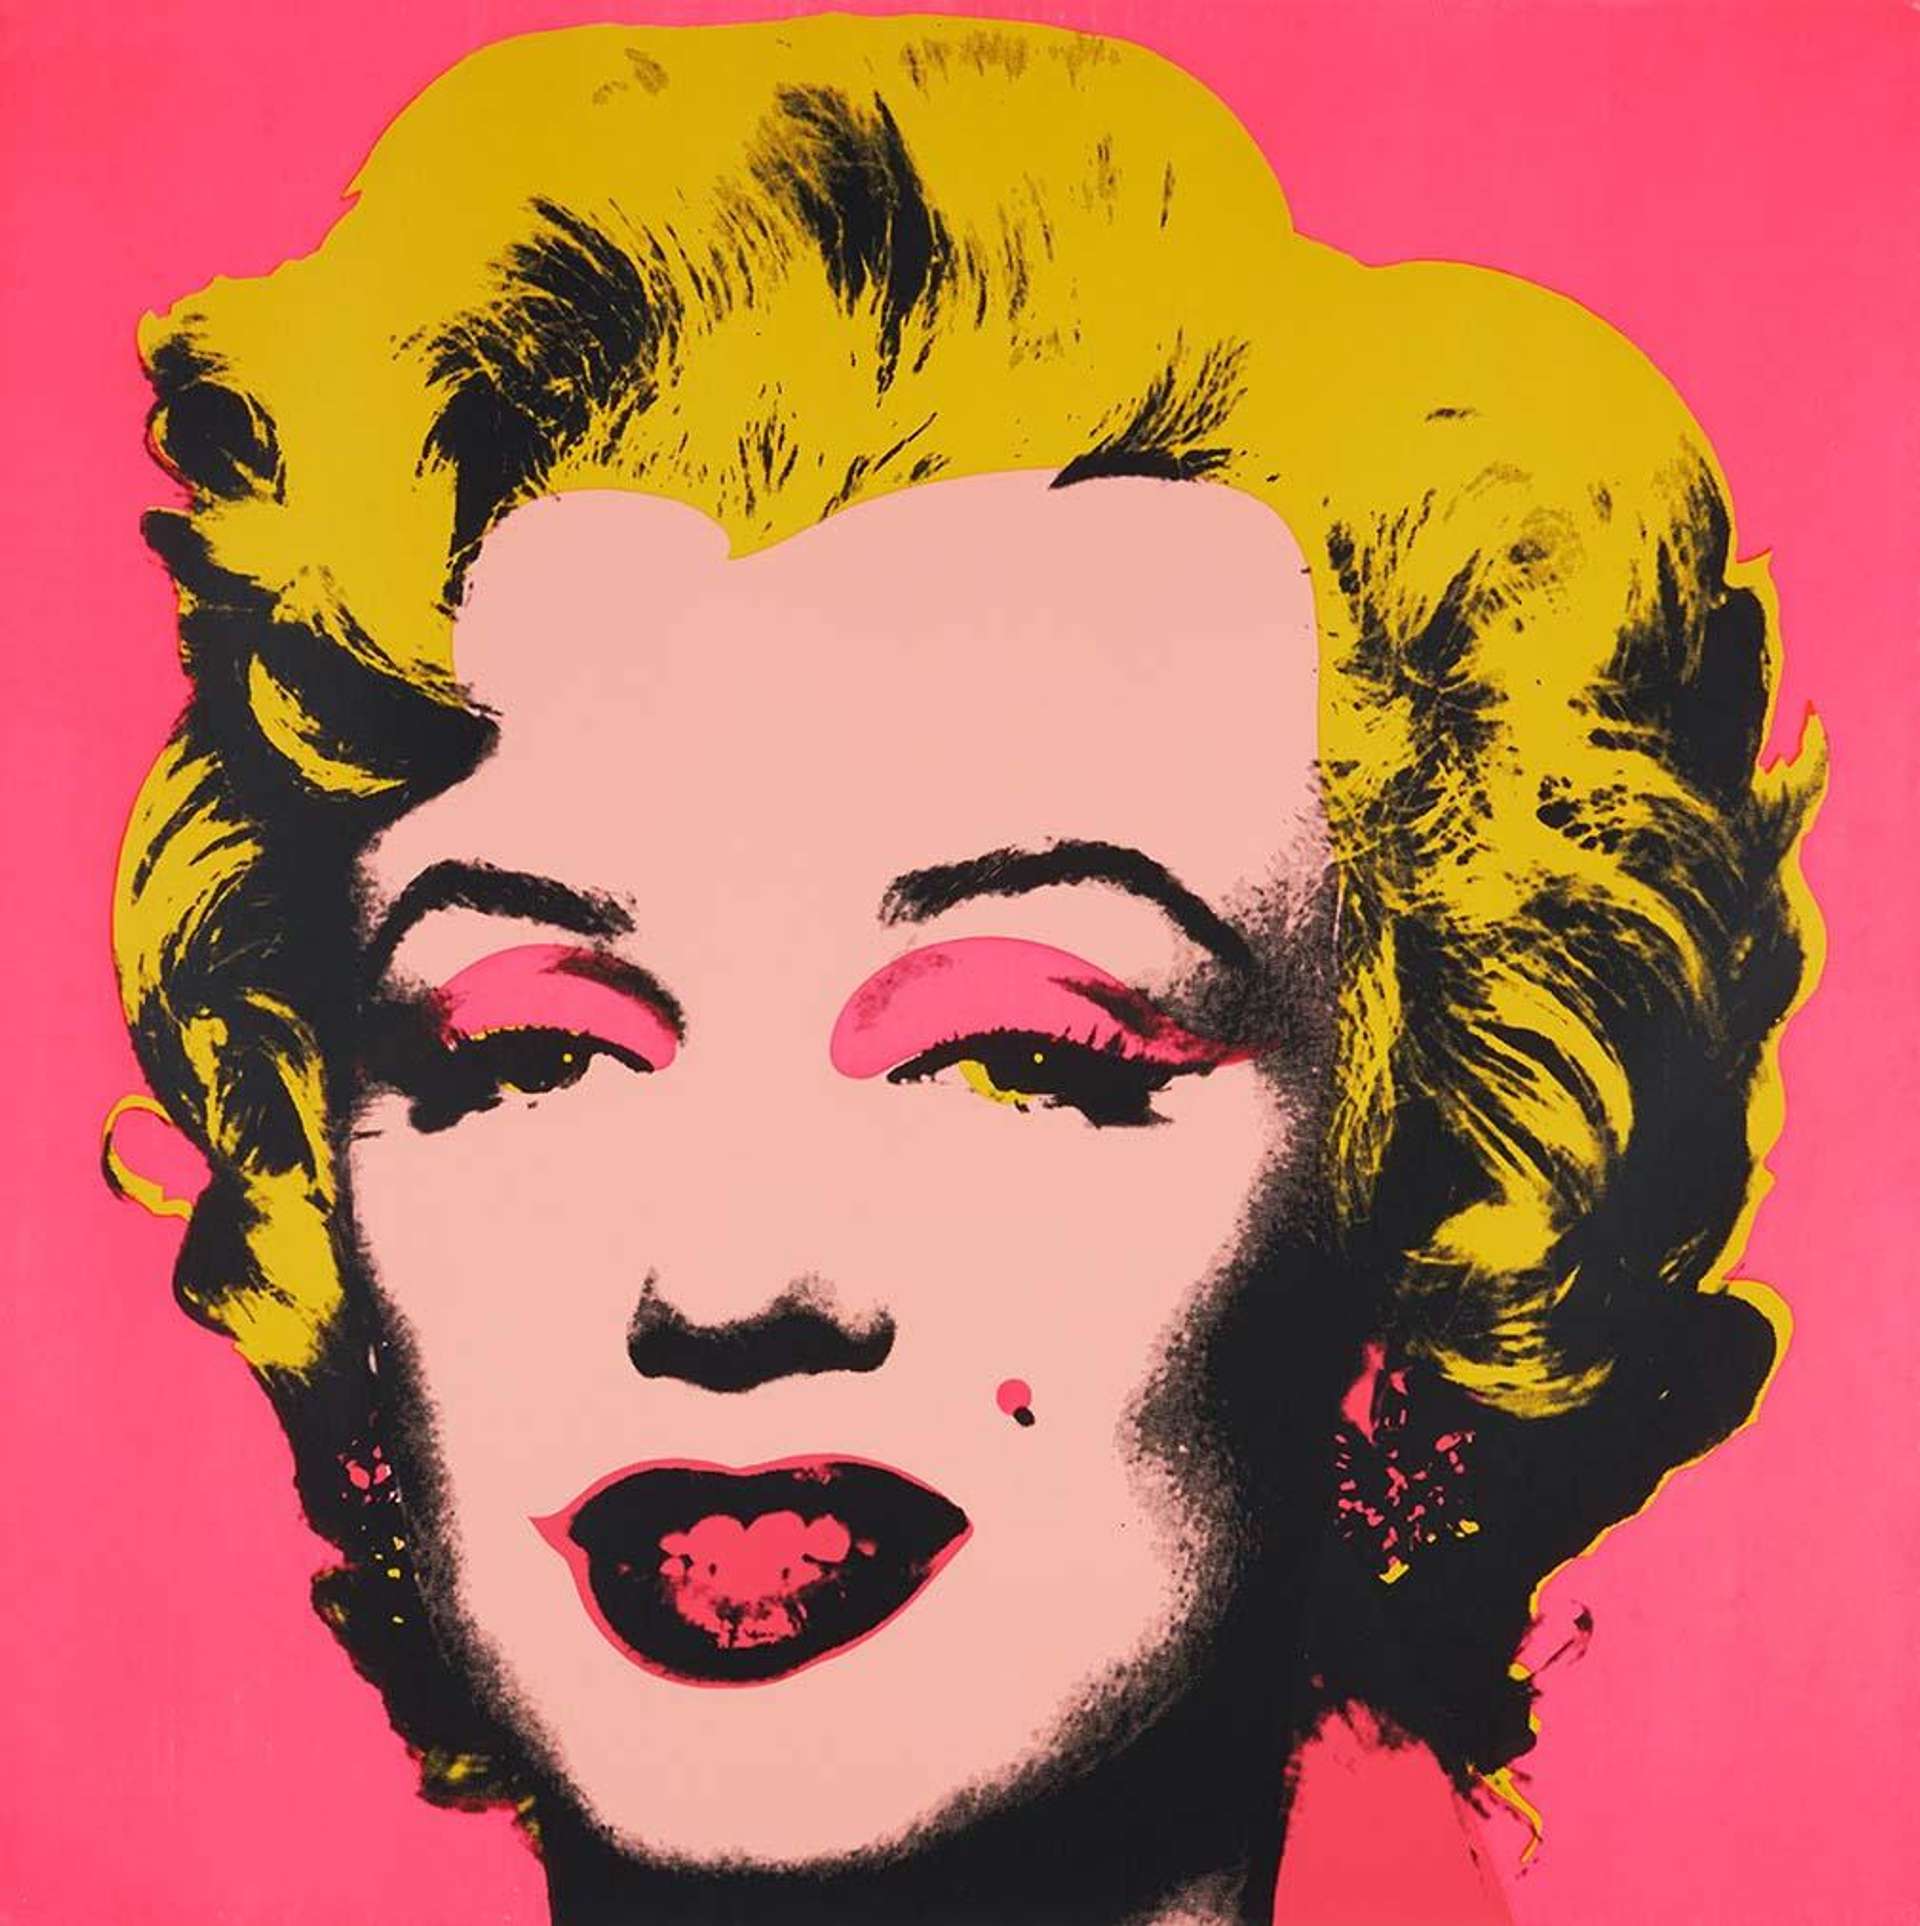 This is a screen print from Andy Warhol’s Marilyn series, a portrait of the world-famous actress Marilyn Monroe depicted in brilliant hues, with her hair coloured yellow and vivid magenta colouring her lips, eyelids and backdrop.